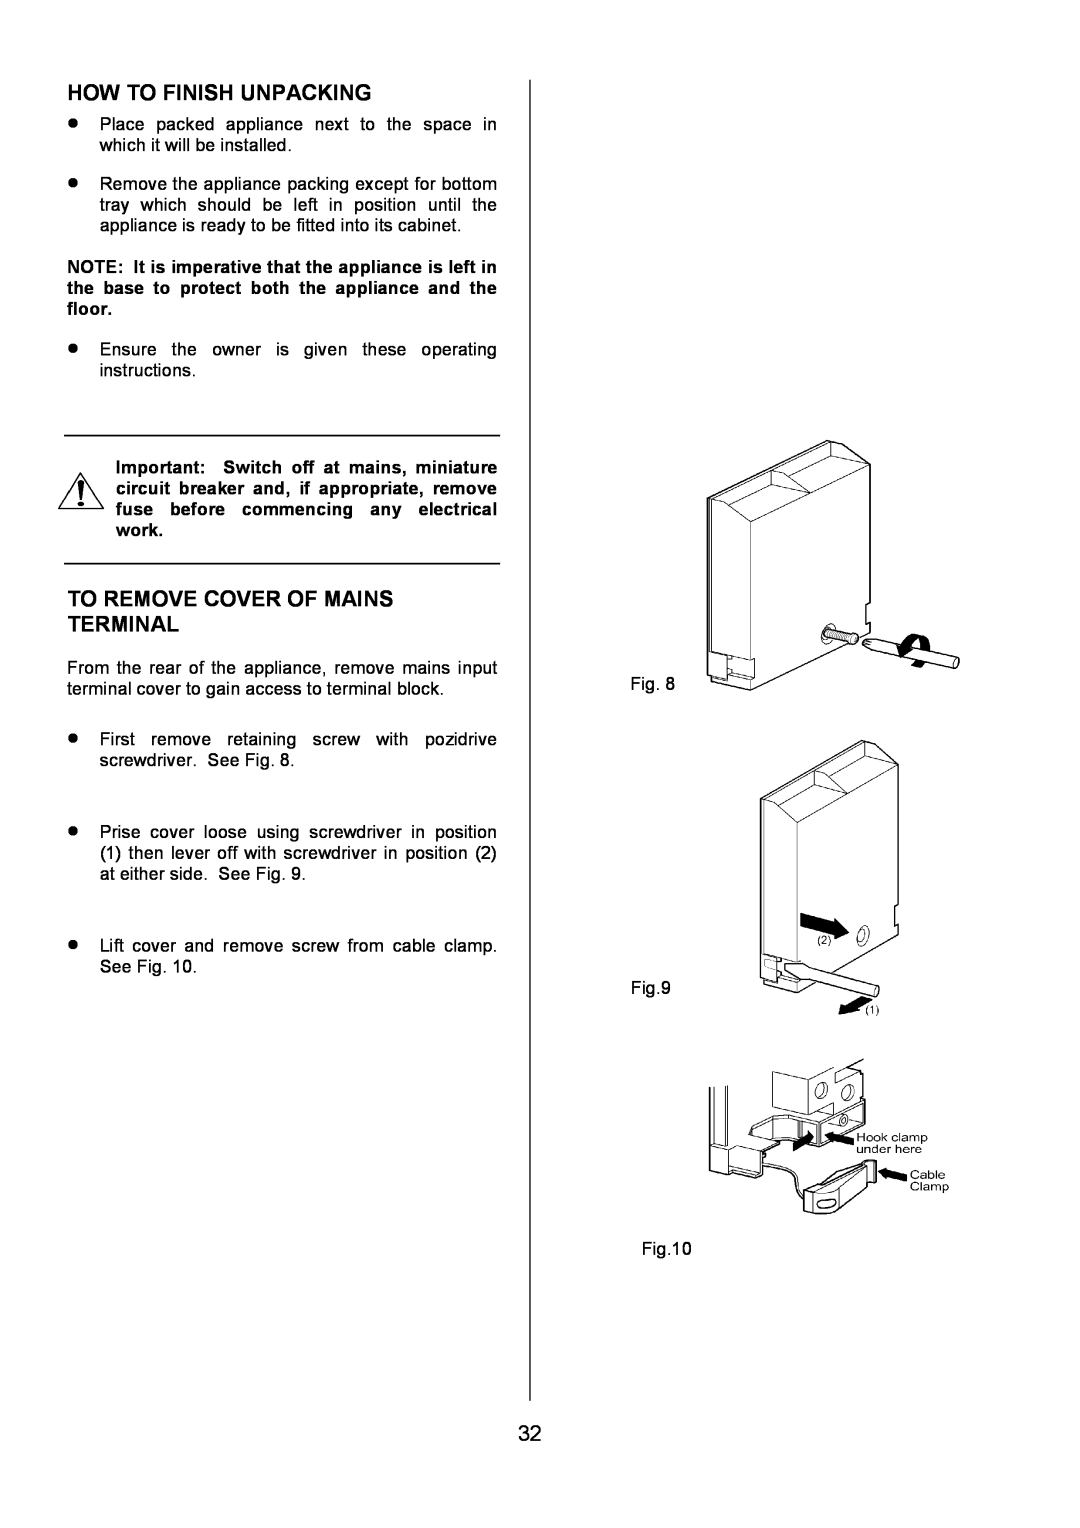 Zanussi ZOU 330 manual How To Finish Unpacking, To Remove Cover Of Mains Terminal 